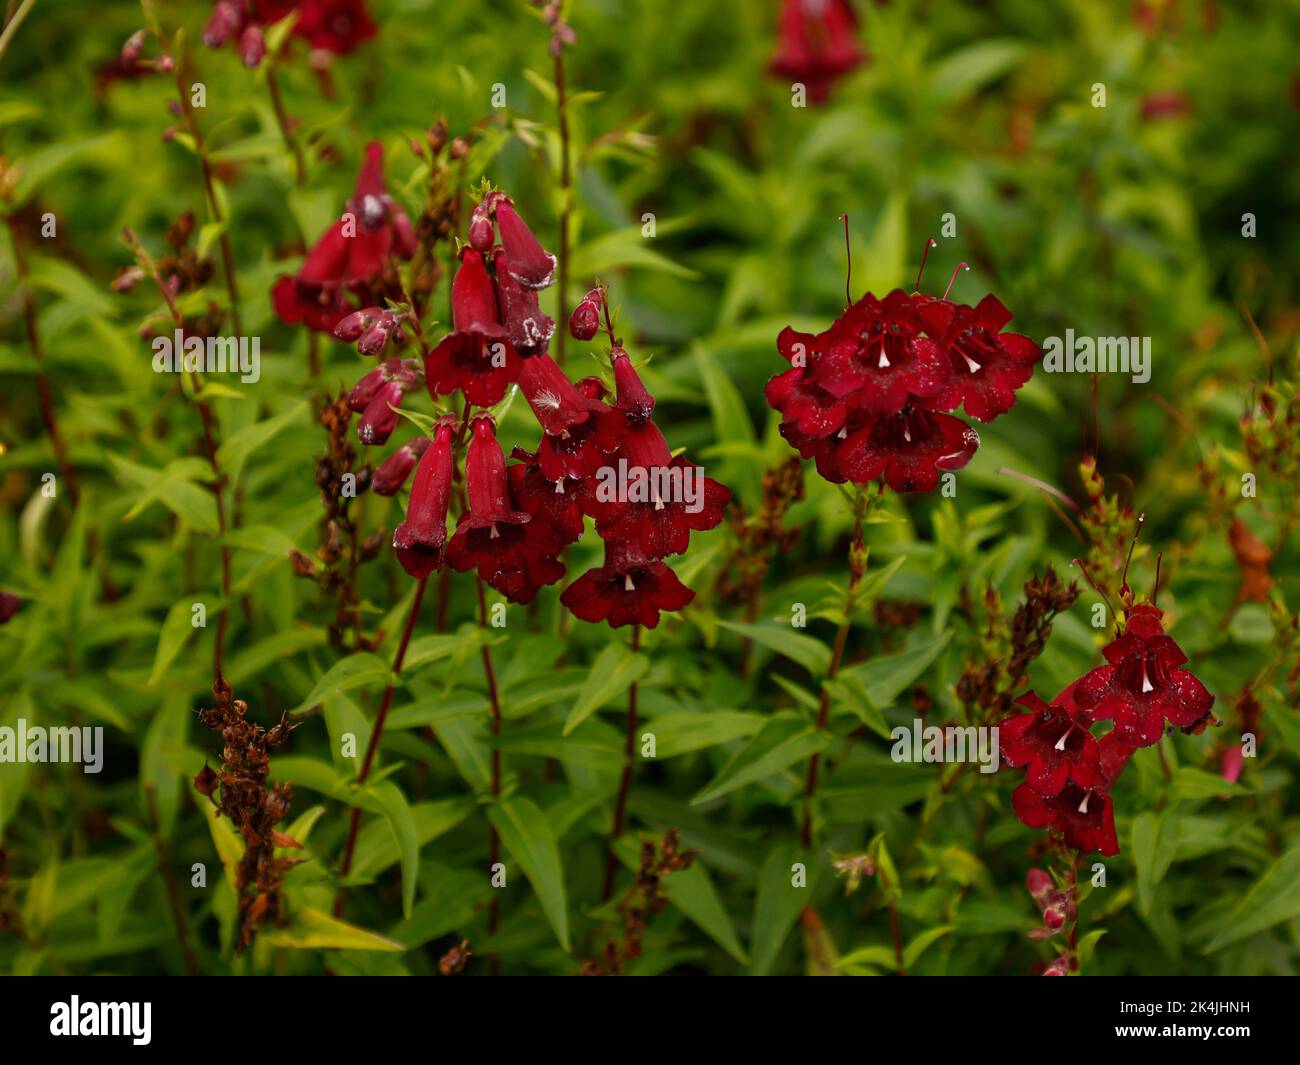 Close up of the herbaceous perennial garden plant Penstemon Rich Ruby with deep red bell-shaped flowers flowering from summer to autumn. Stock Photo